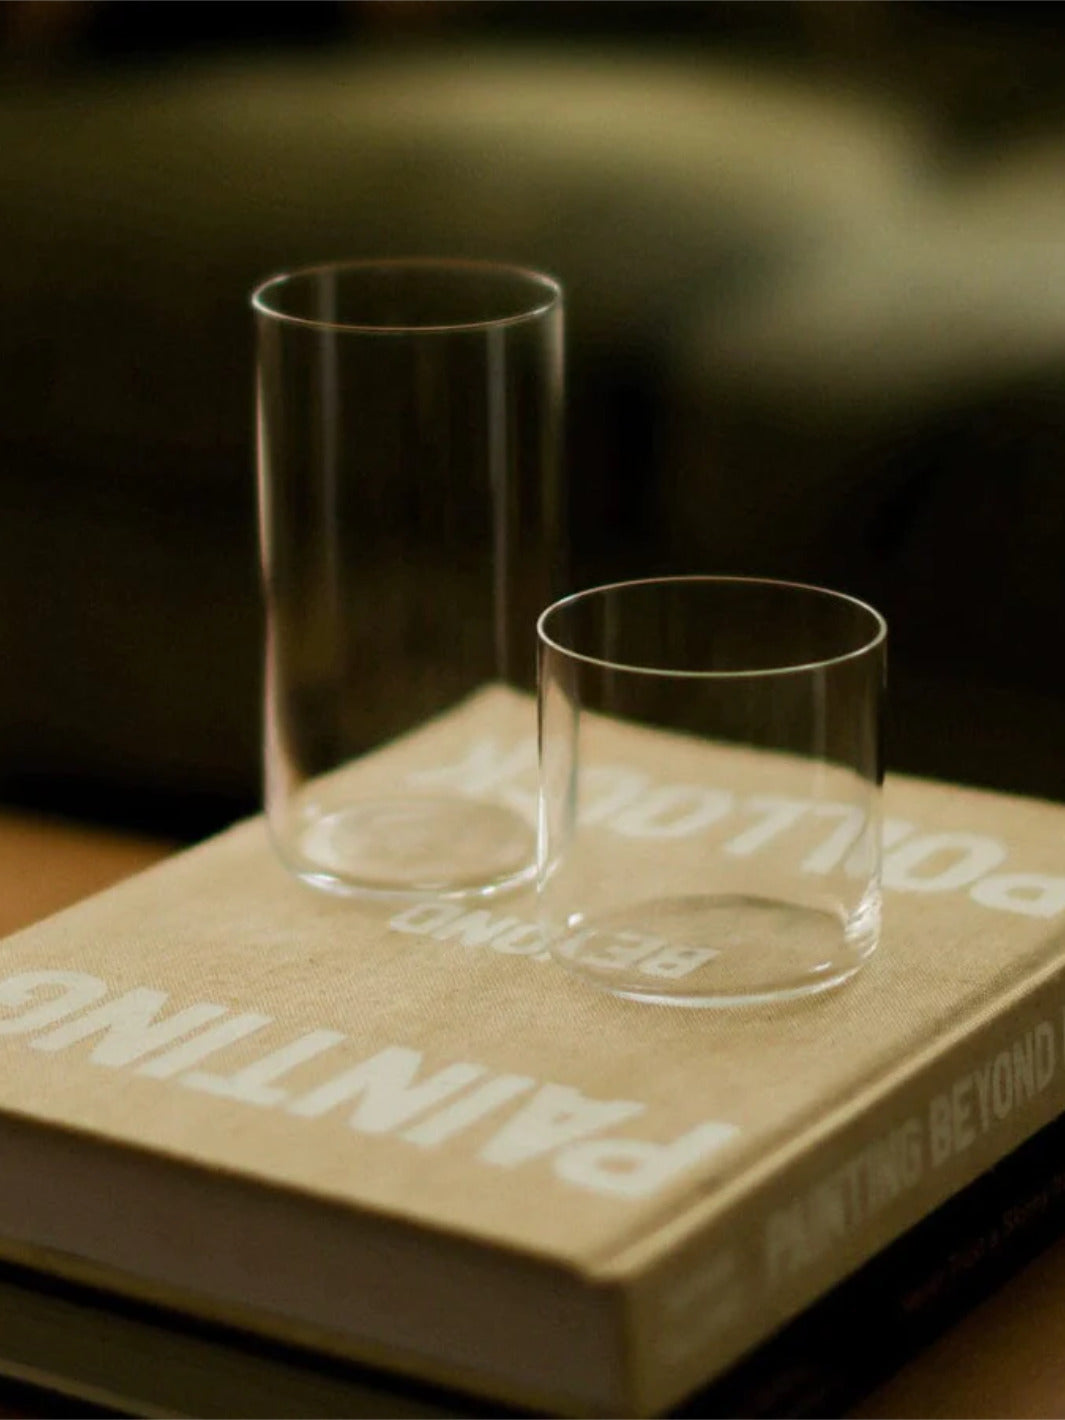 FABLE The Short Glasses (4-Pack)